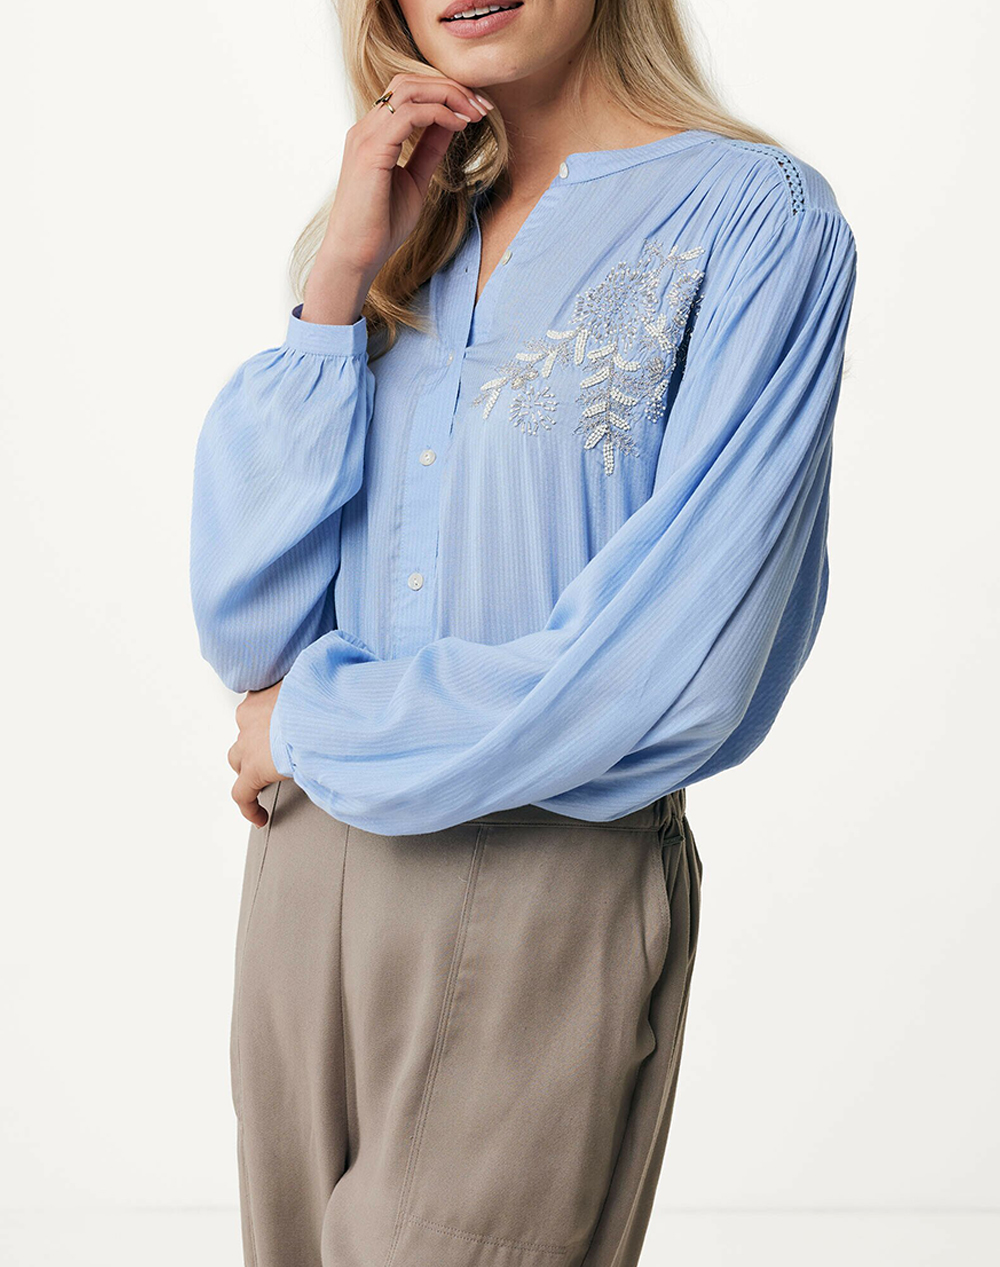 MEXX Blouse with chest embroidery MF006102241W-153919 SkyBlue 3810PMEXX3400179_XR28241